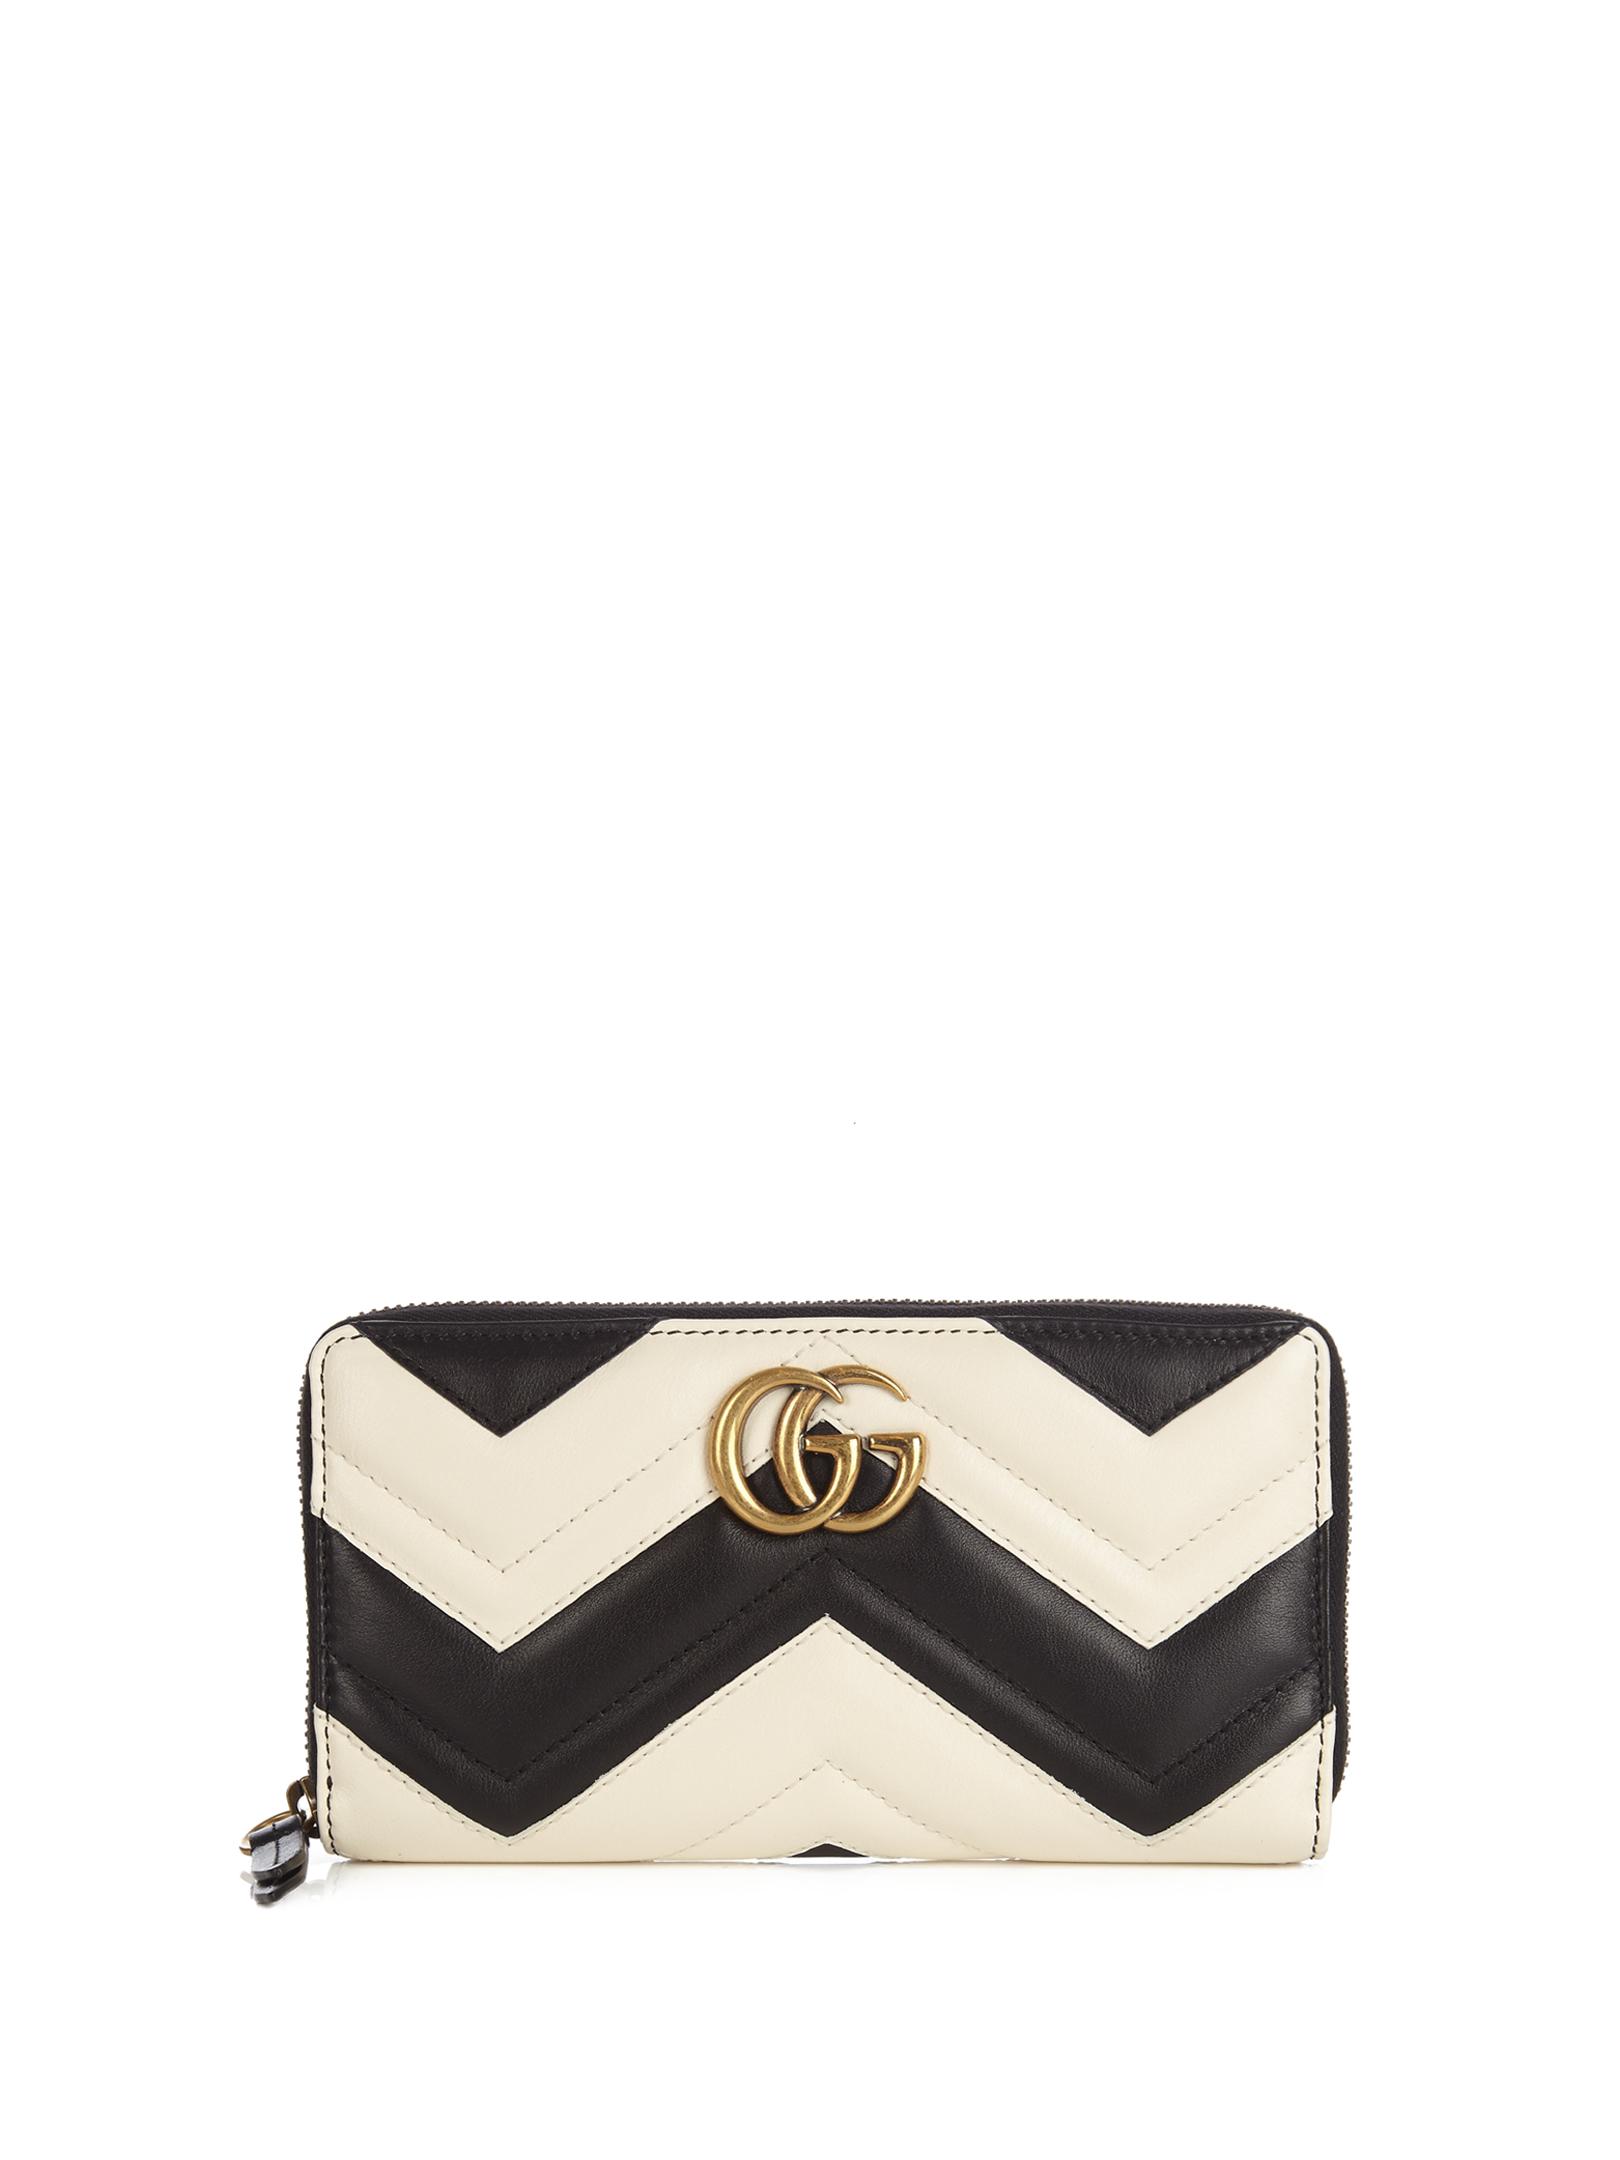 Gucci Gg Marmont Quilted-leather Wallet in Black | Lyst